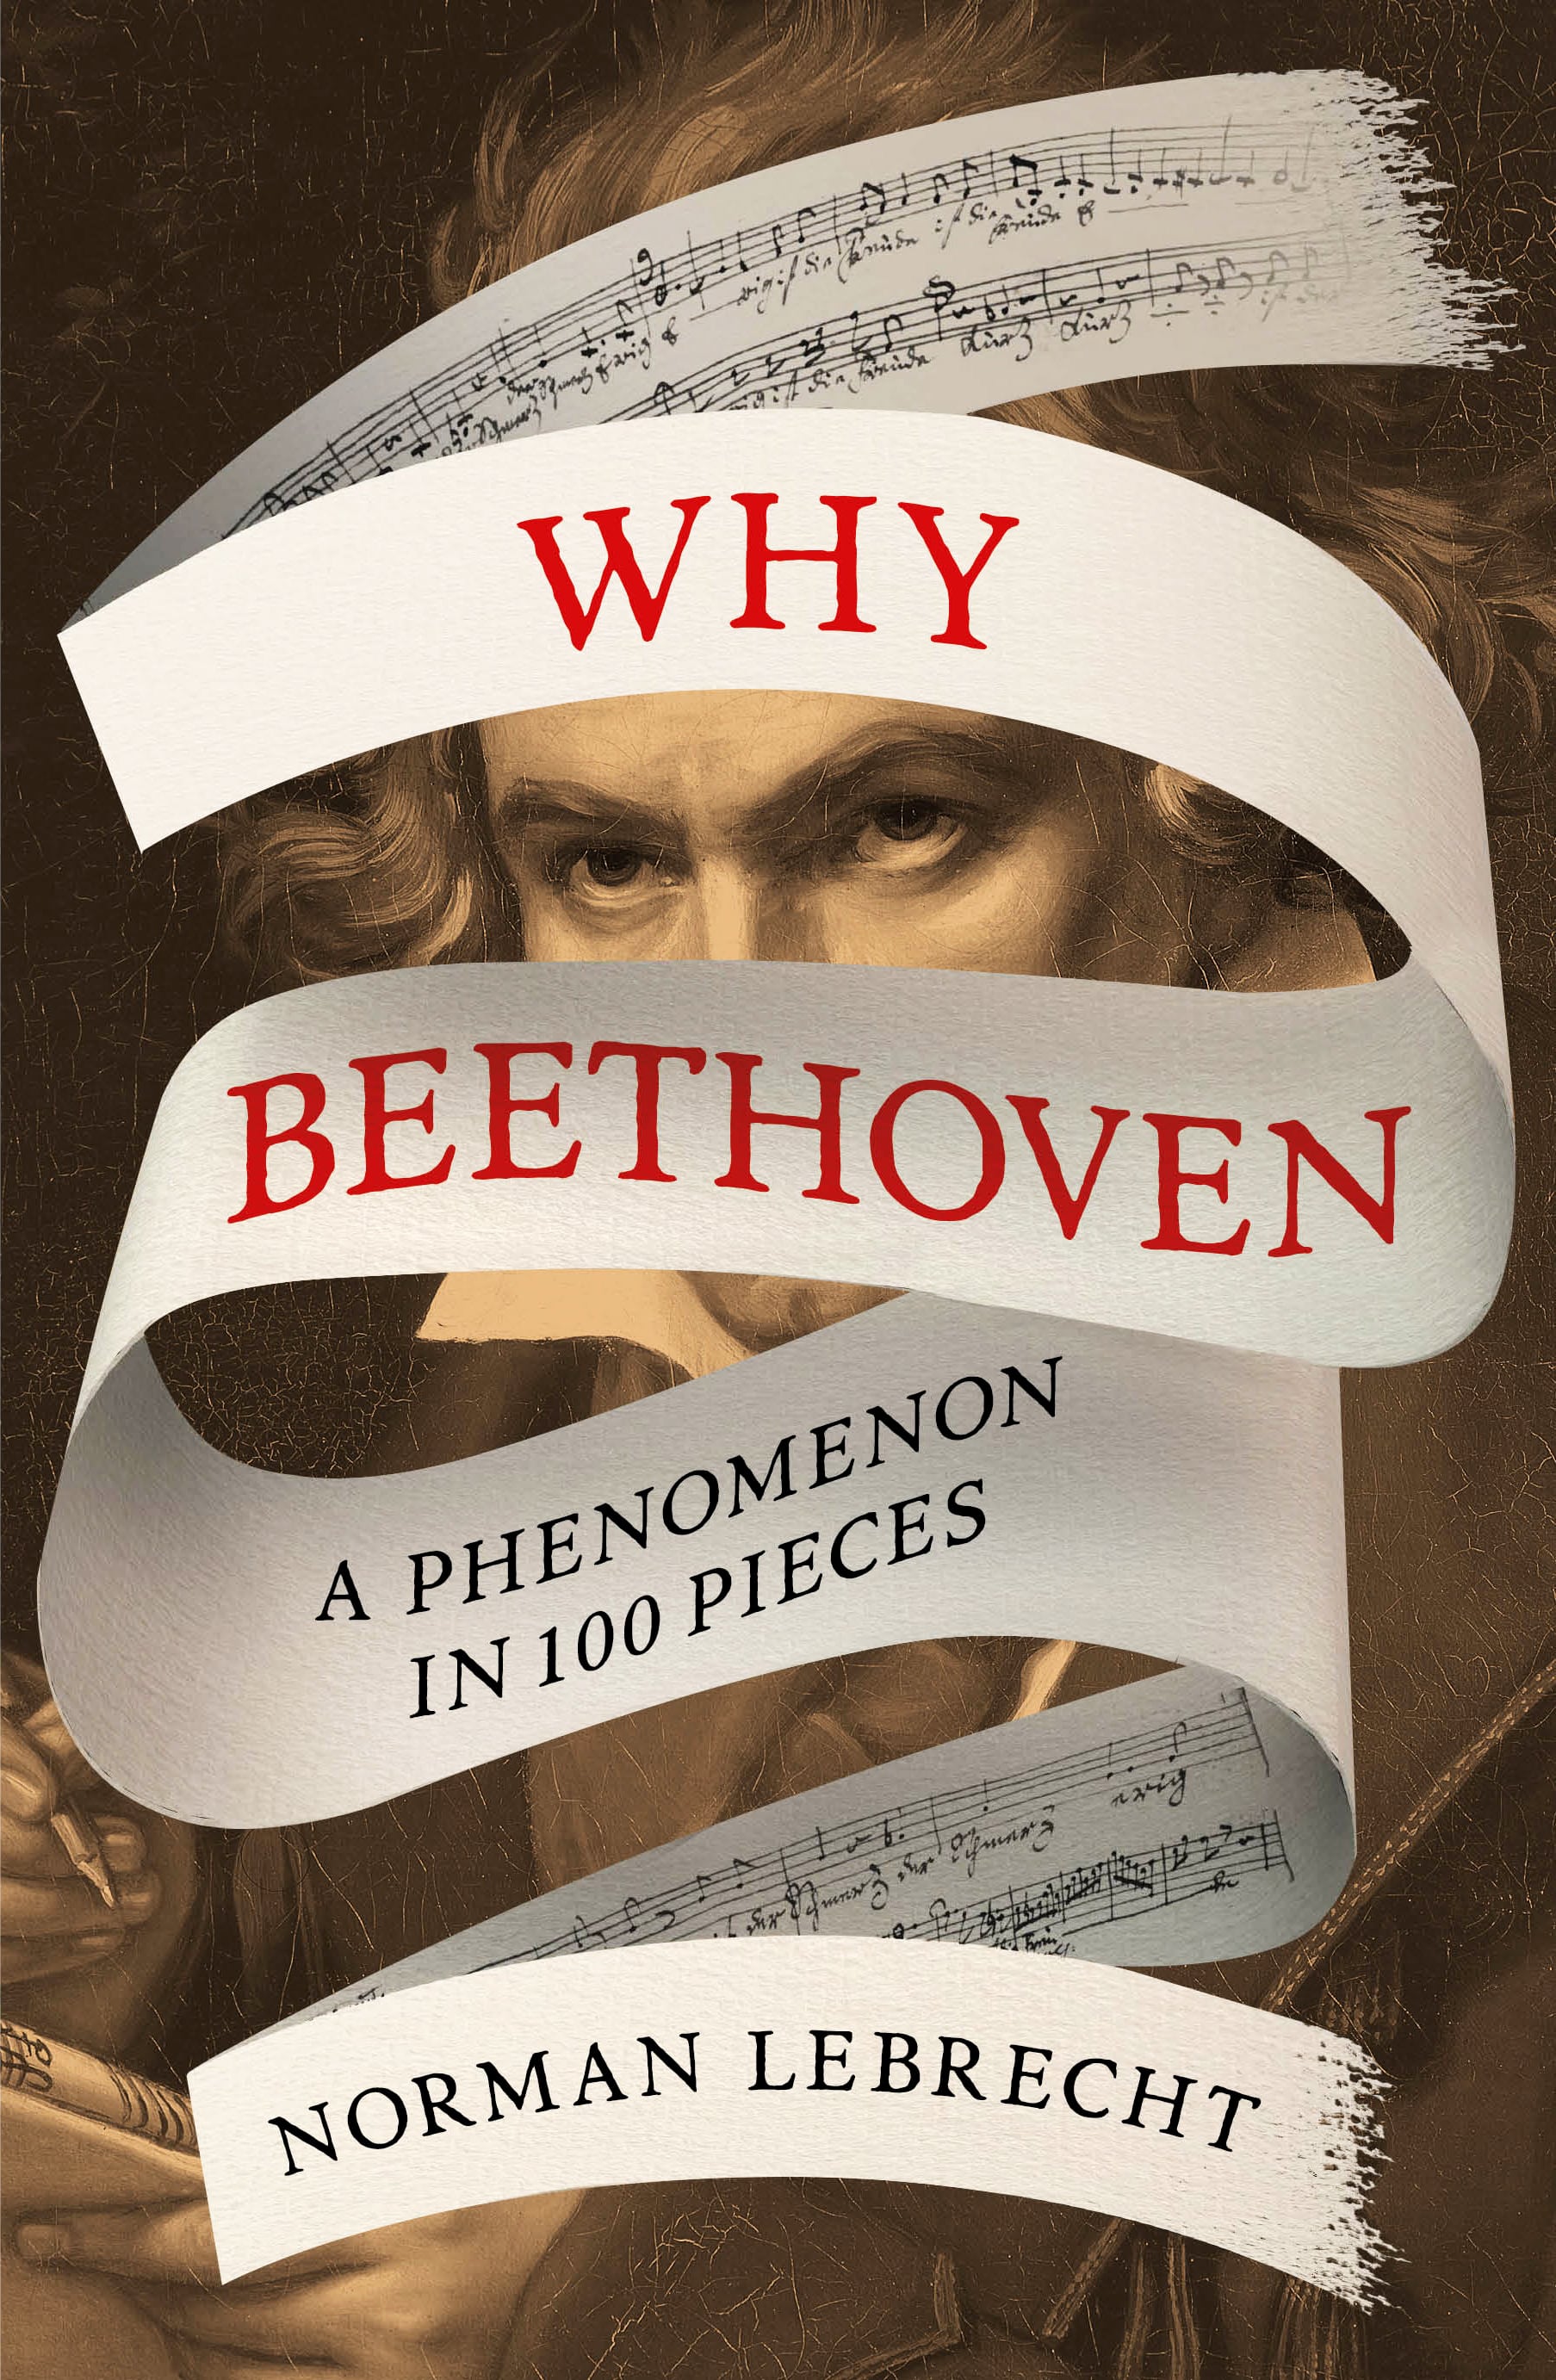 Why Beethoven pianist gets signed up